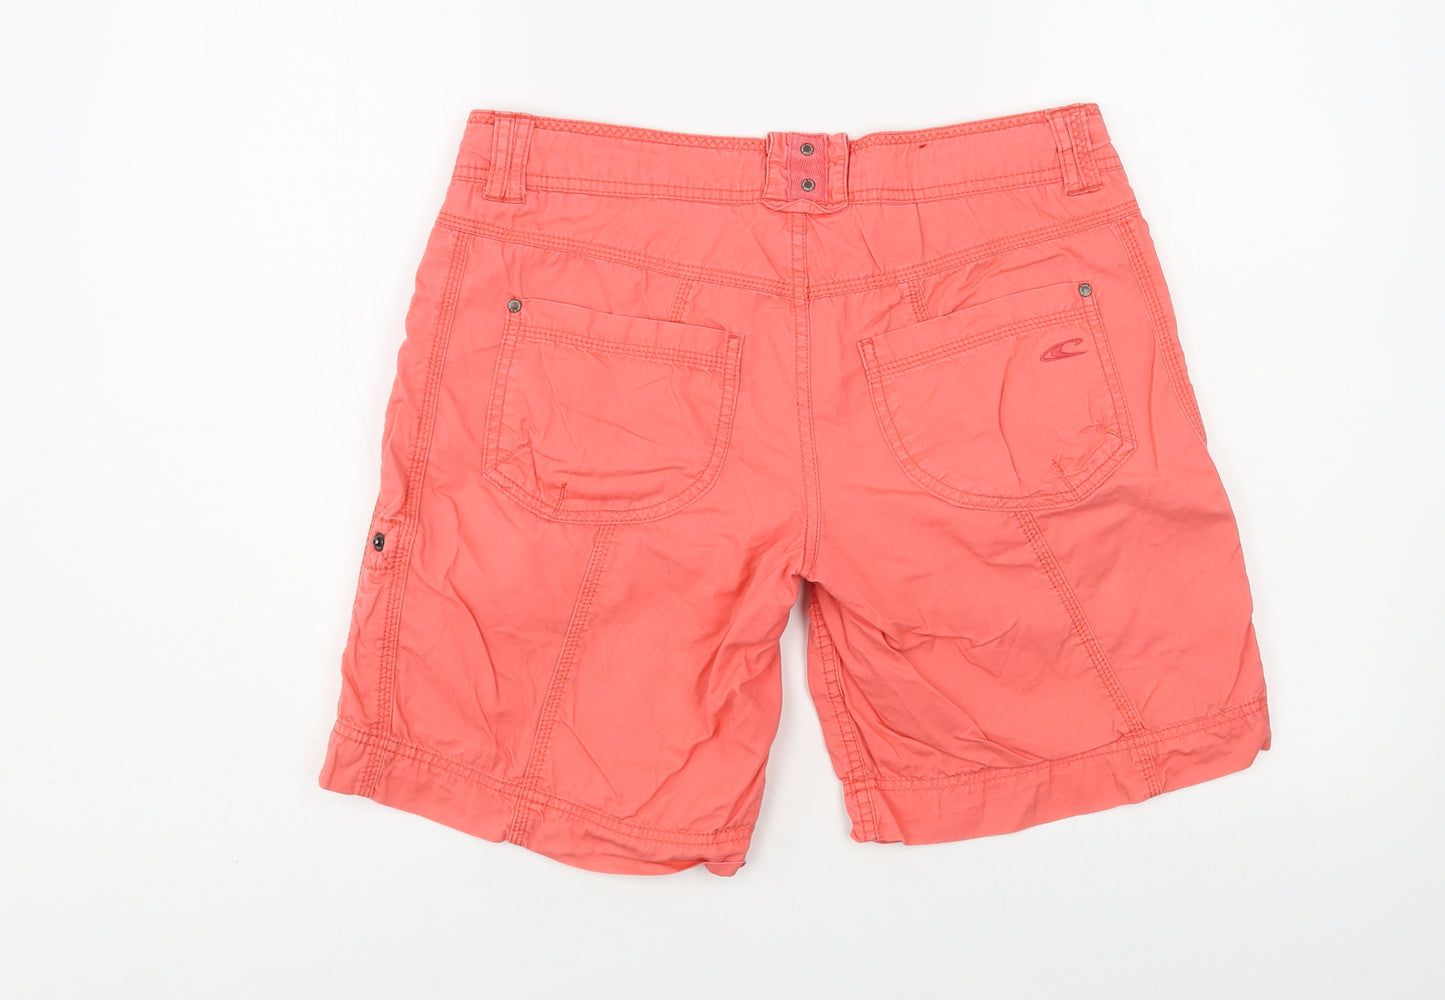 O'Neill Womens Pink Cotton Bermuda Shorts Size 28 in L9 in Regular Button